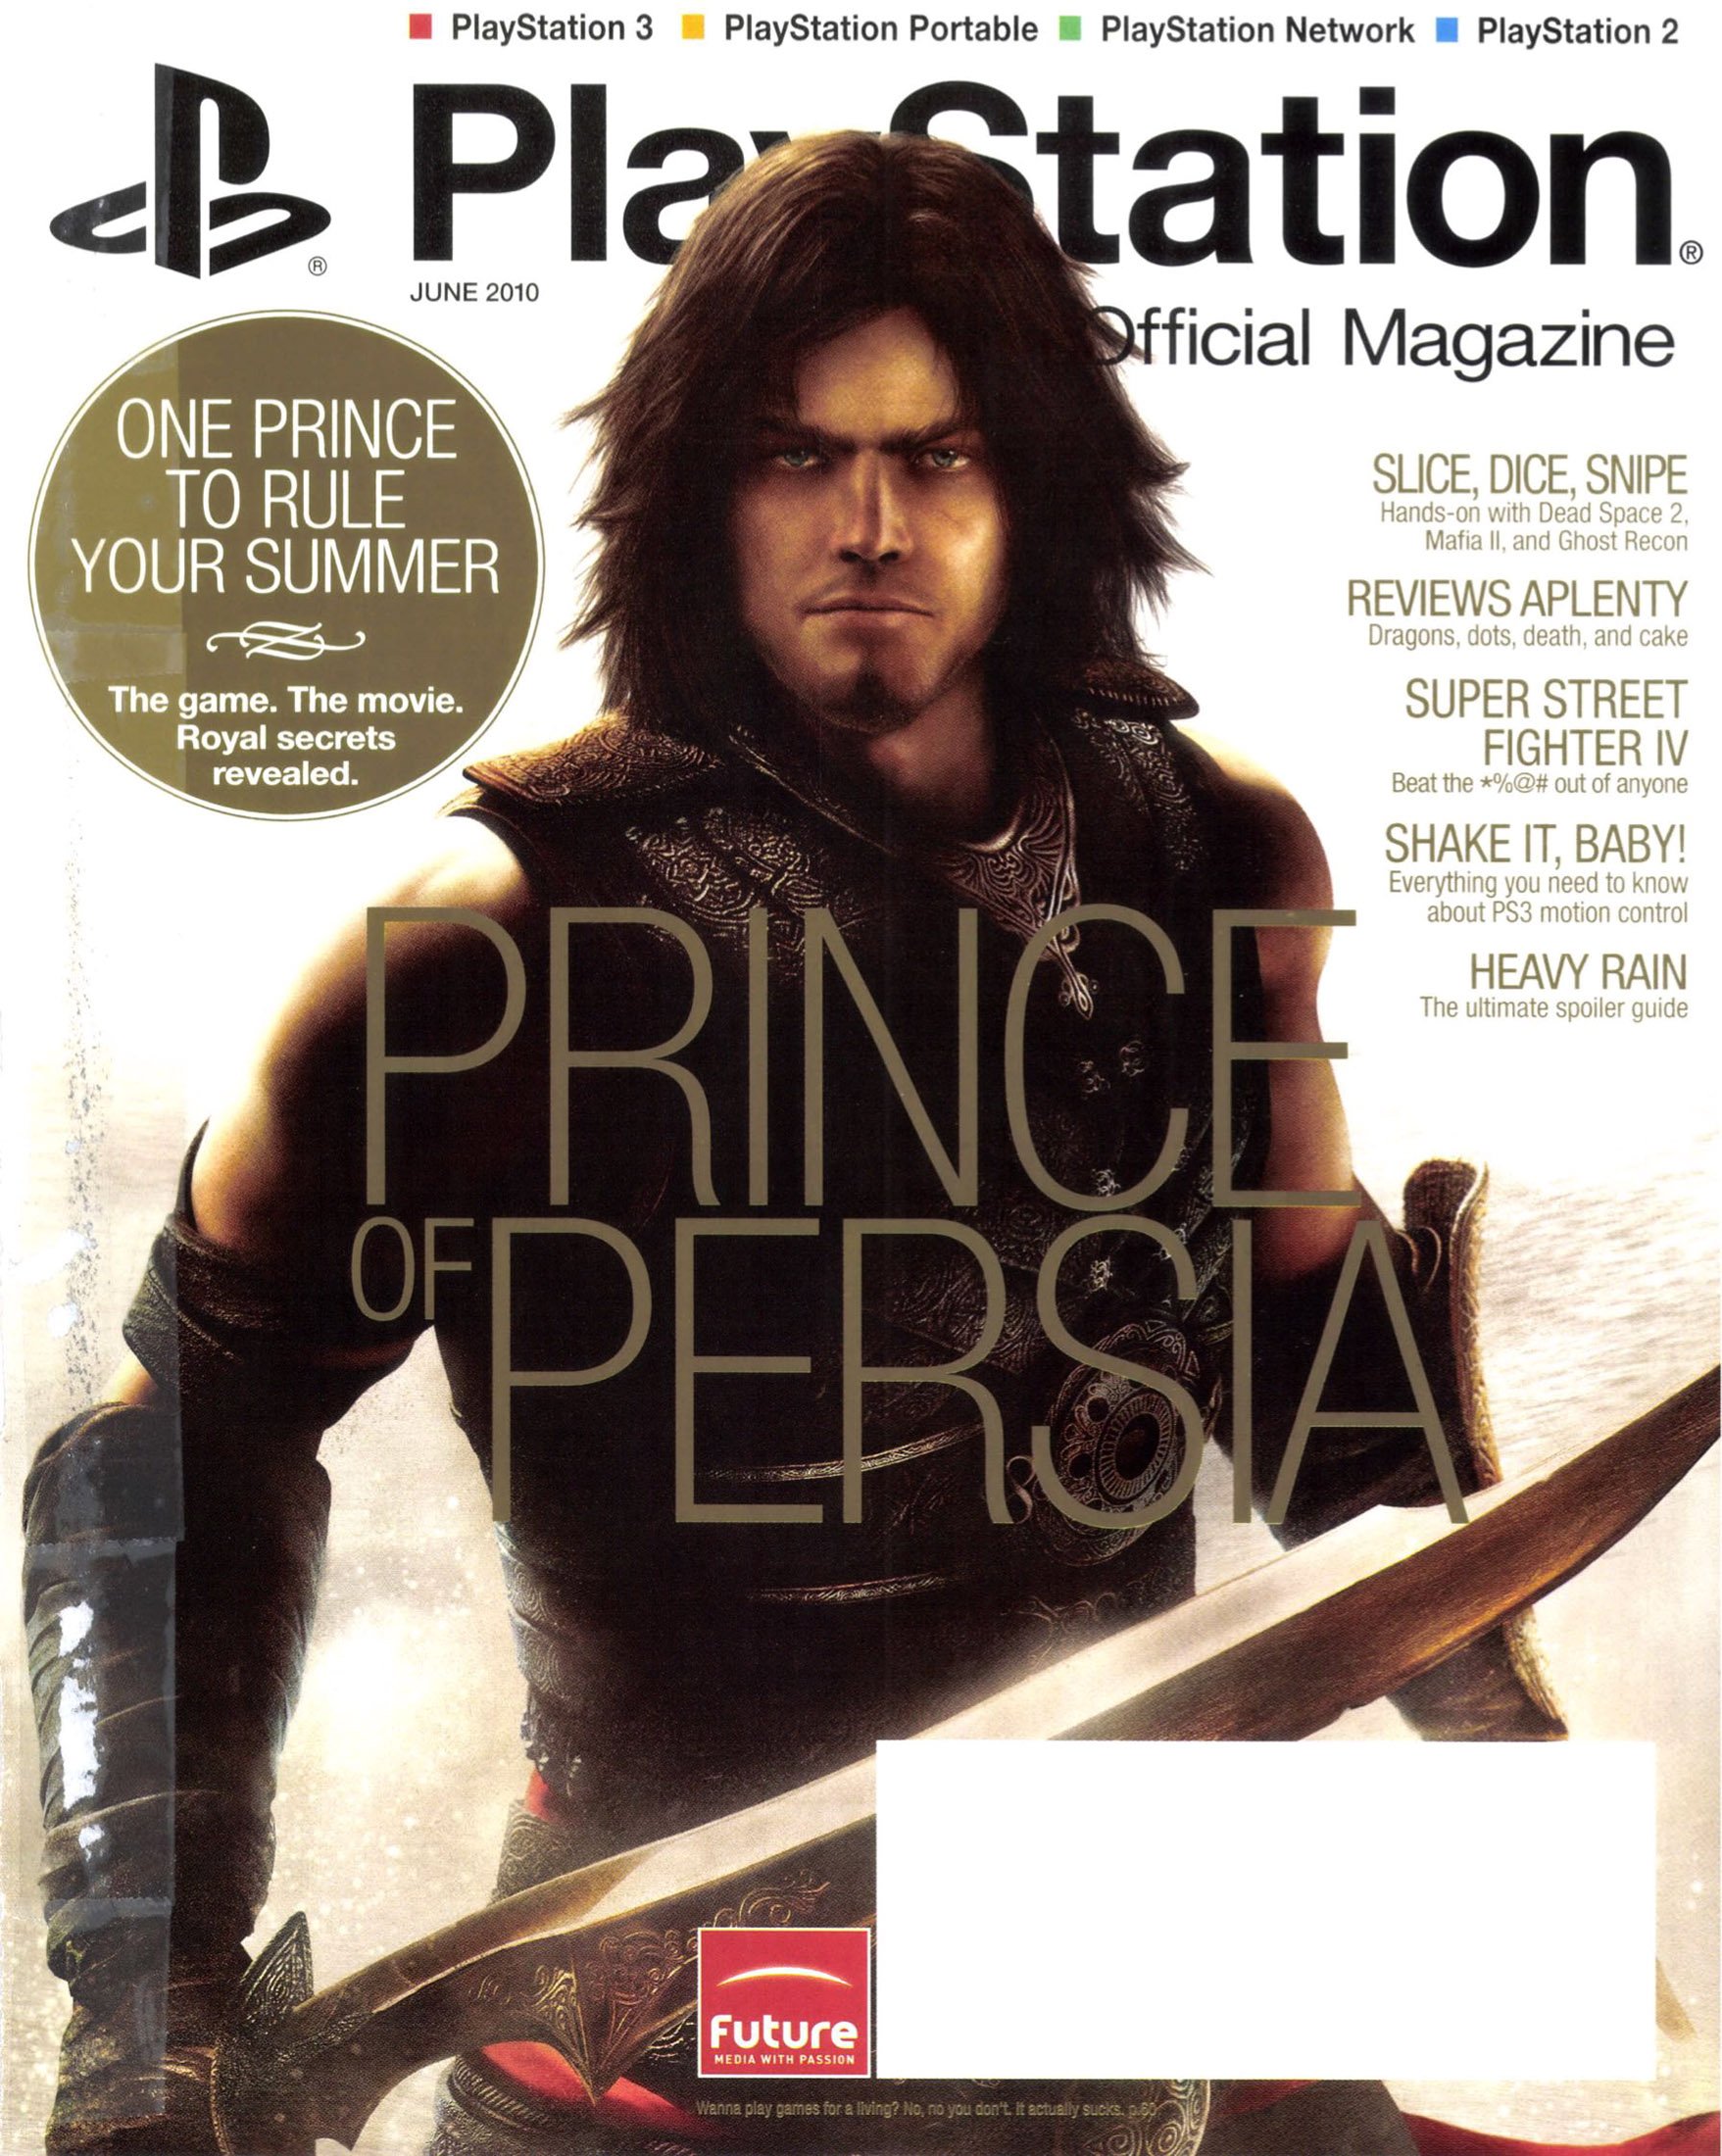 Playstation: The Official Magazine Issue 33 (June 2010)